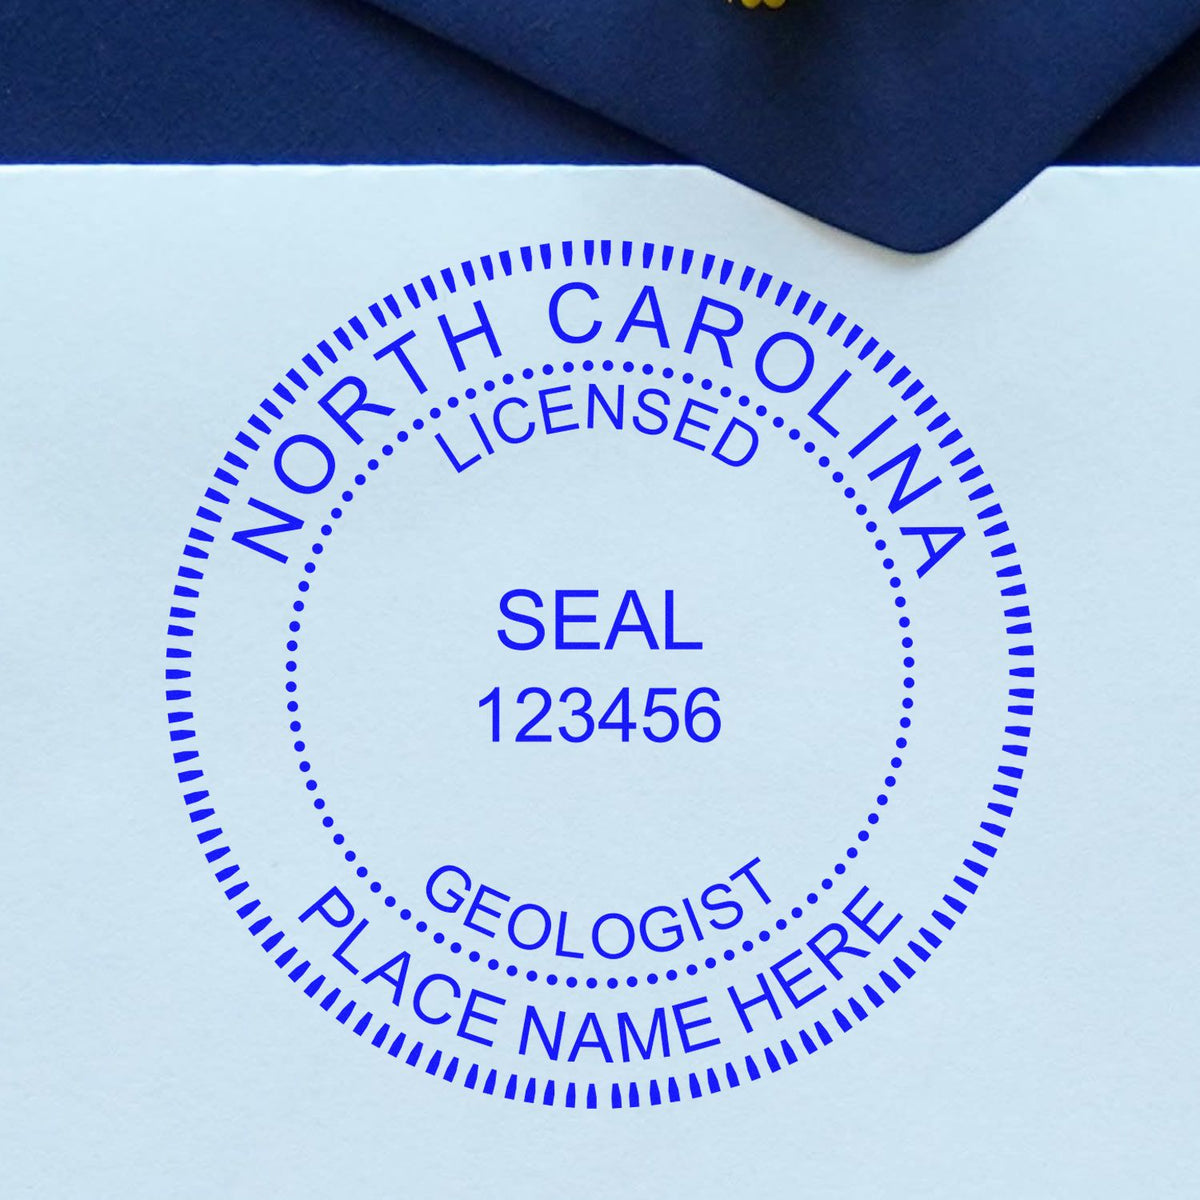 An alternative view of the Self-Inking North Carolina Geologist Stamp stamped on a sheet of paper showing the image in use